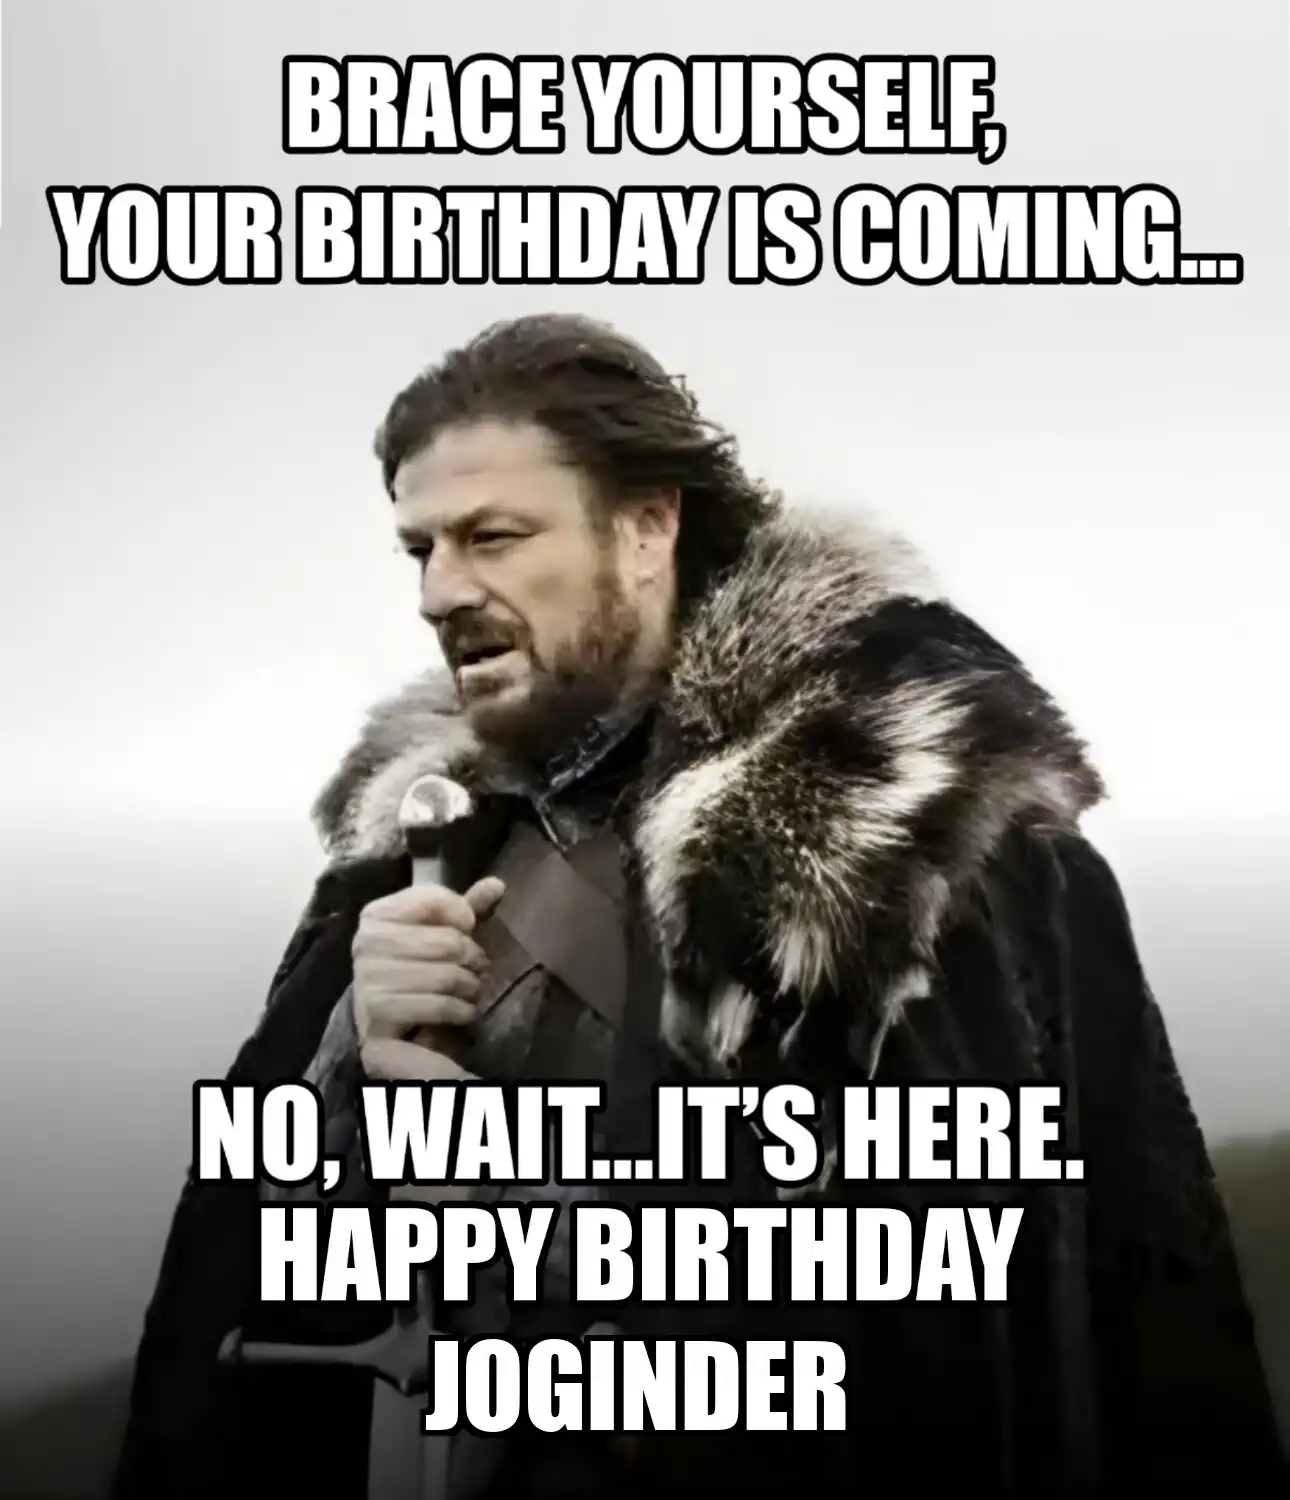 Happy Birthday Joginder Brace Yourself Your Birthday Is Coming Meme